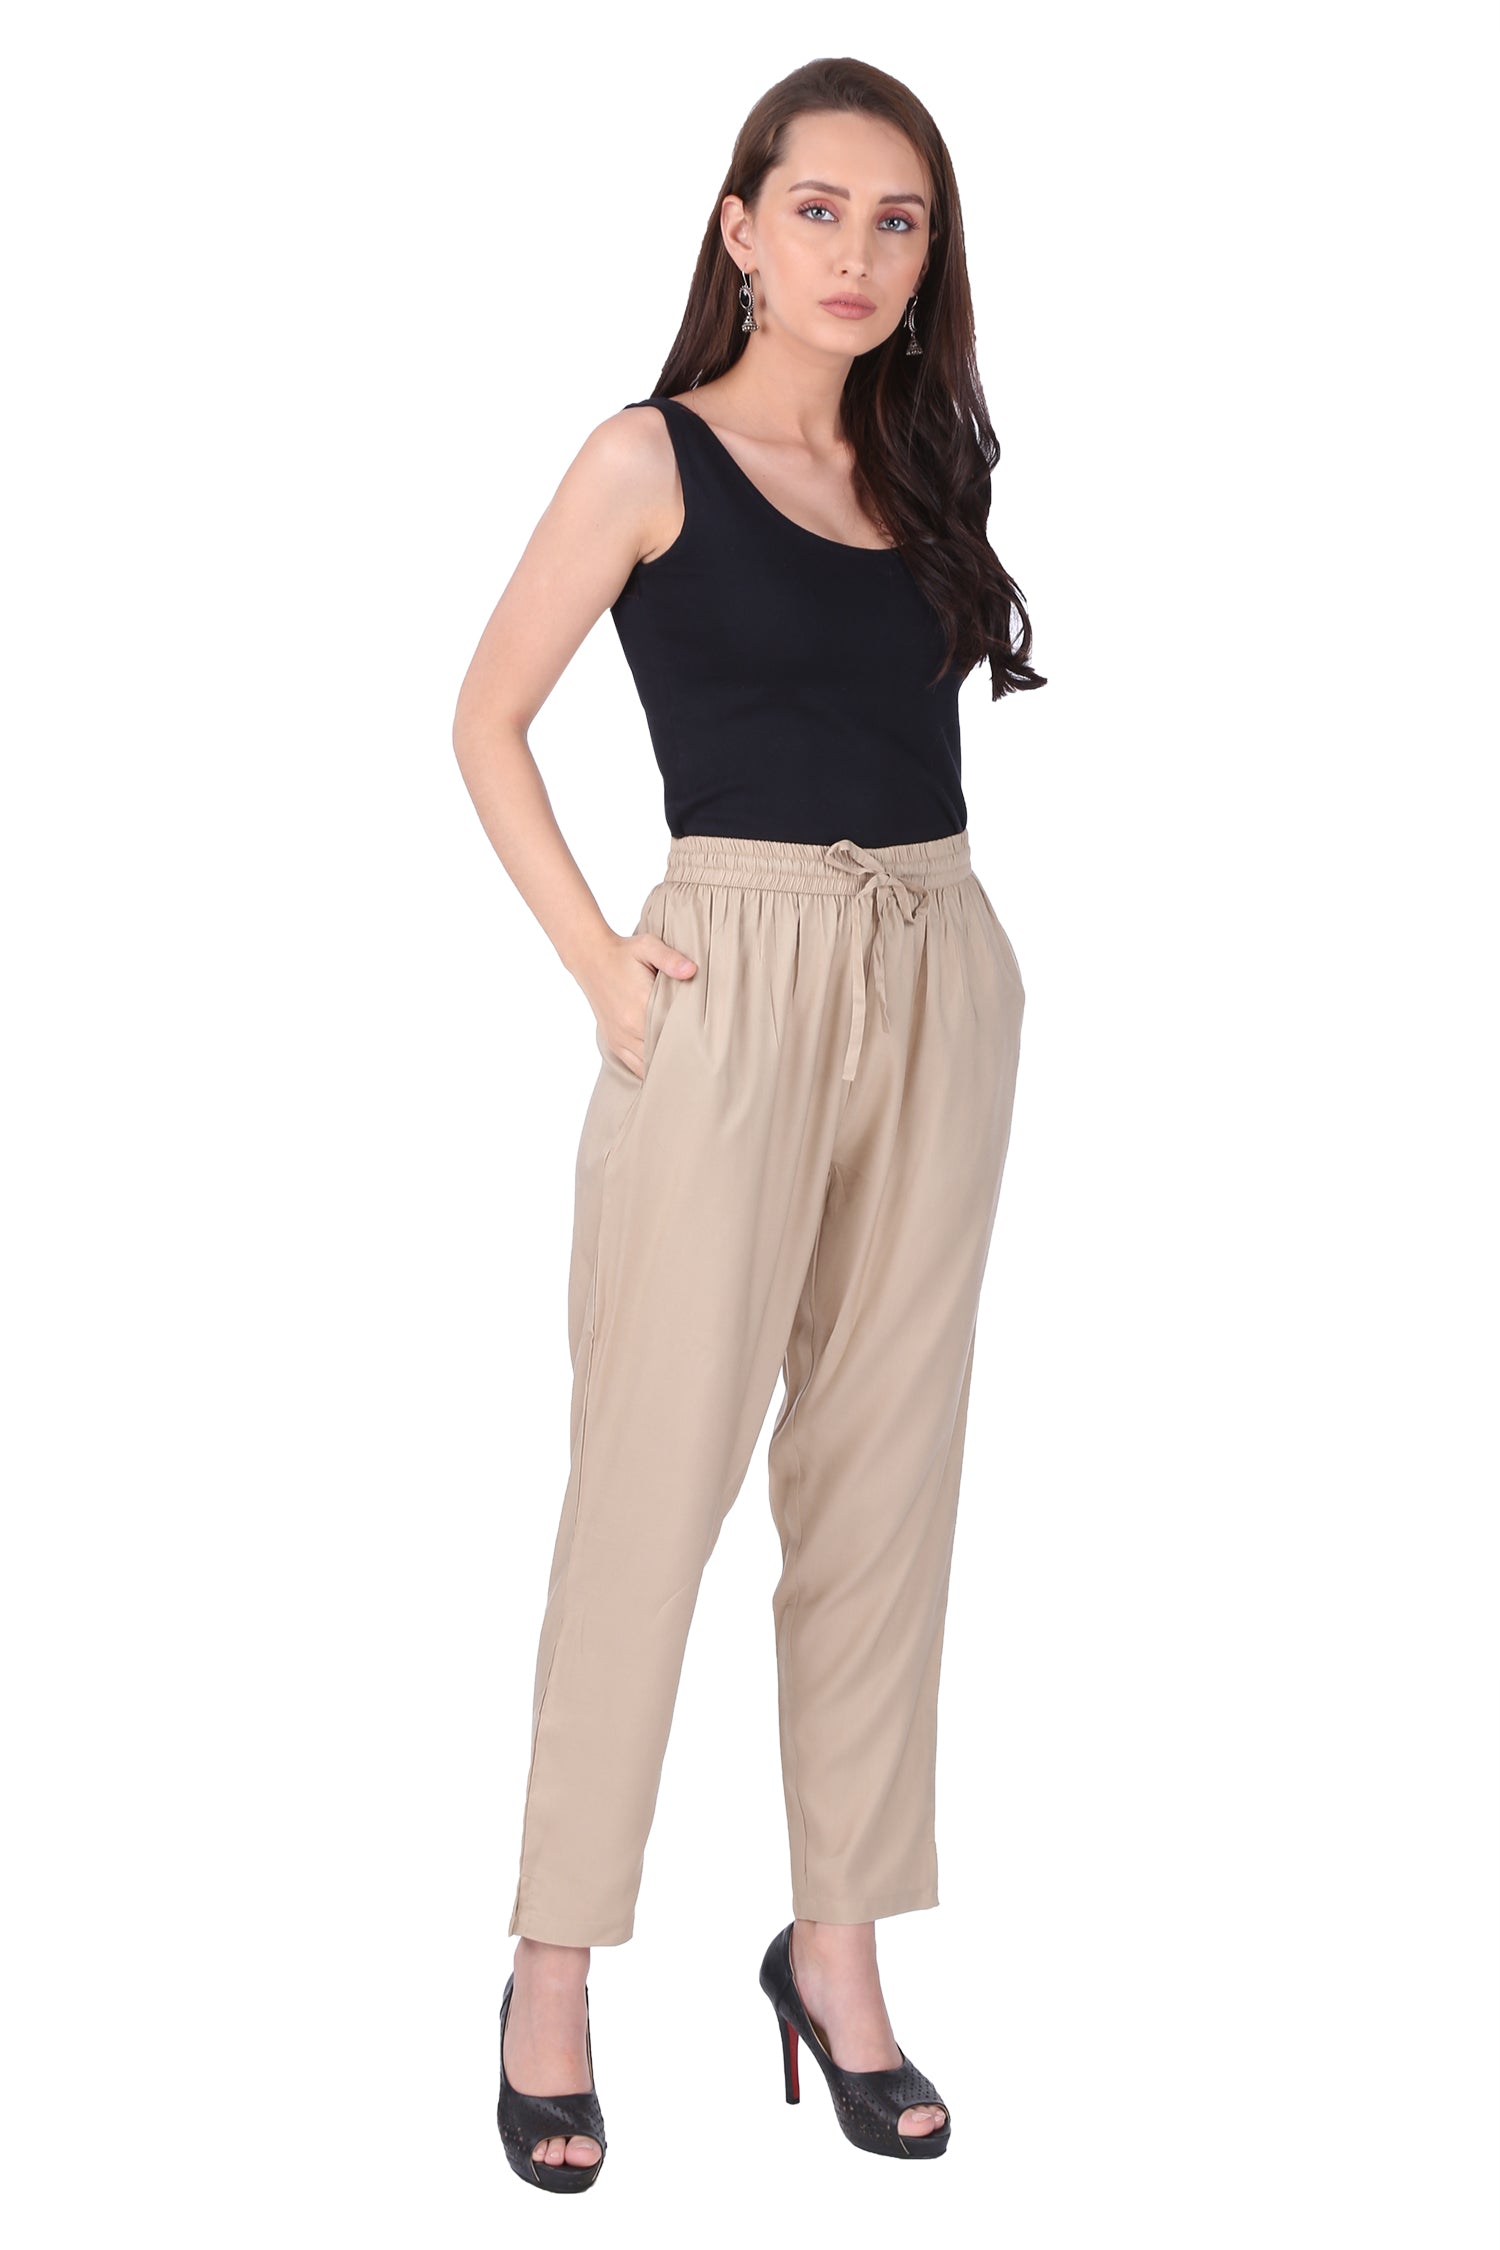 Go Colors Ethnic Bottoms : Go Colors Light Beige Casual Pants Online |  Nykaa Fashion